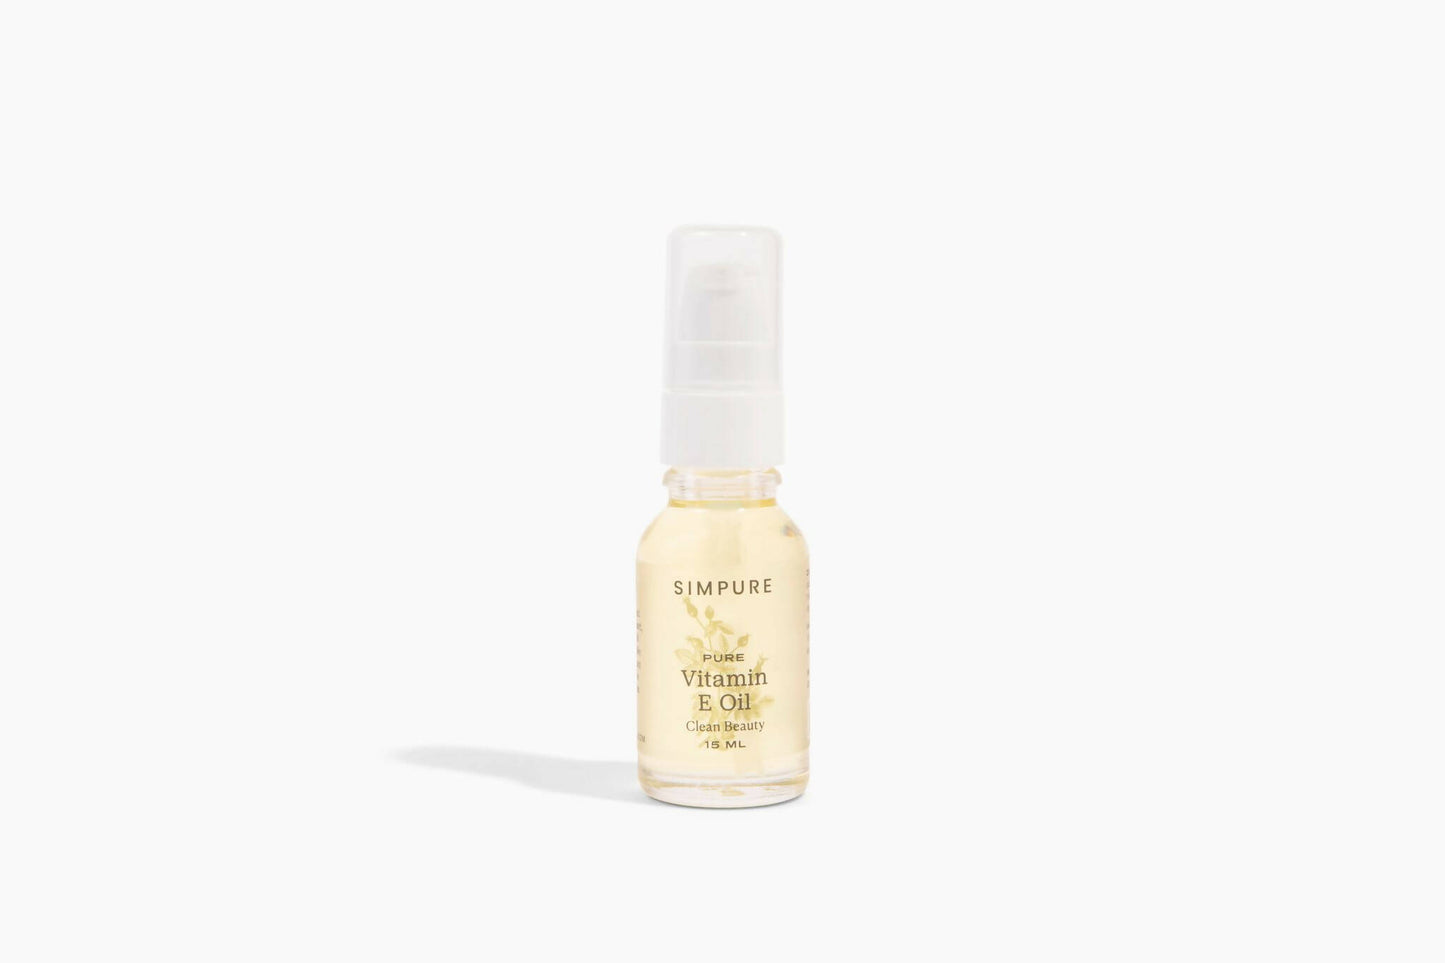 Pure Vitamin E Oil | No Fillers | Great on Scars and Blemishes